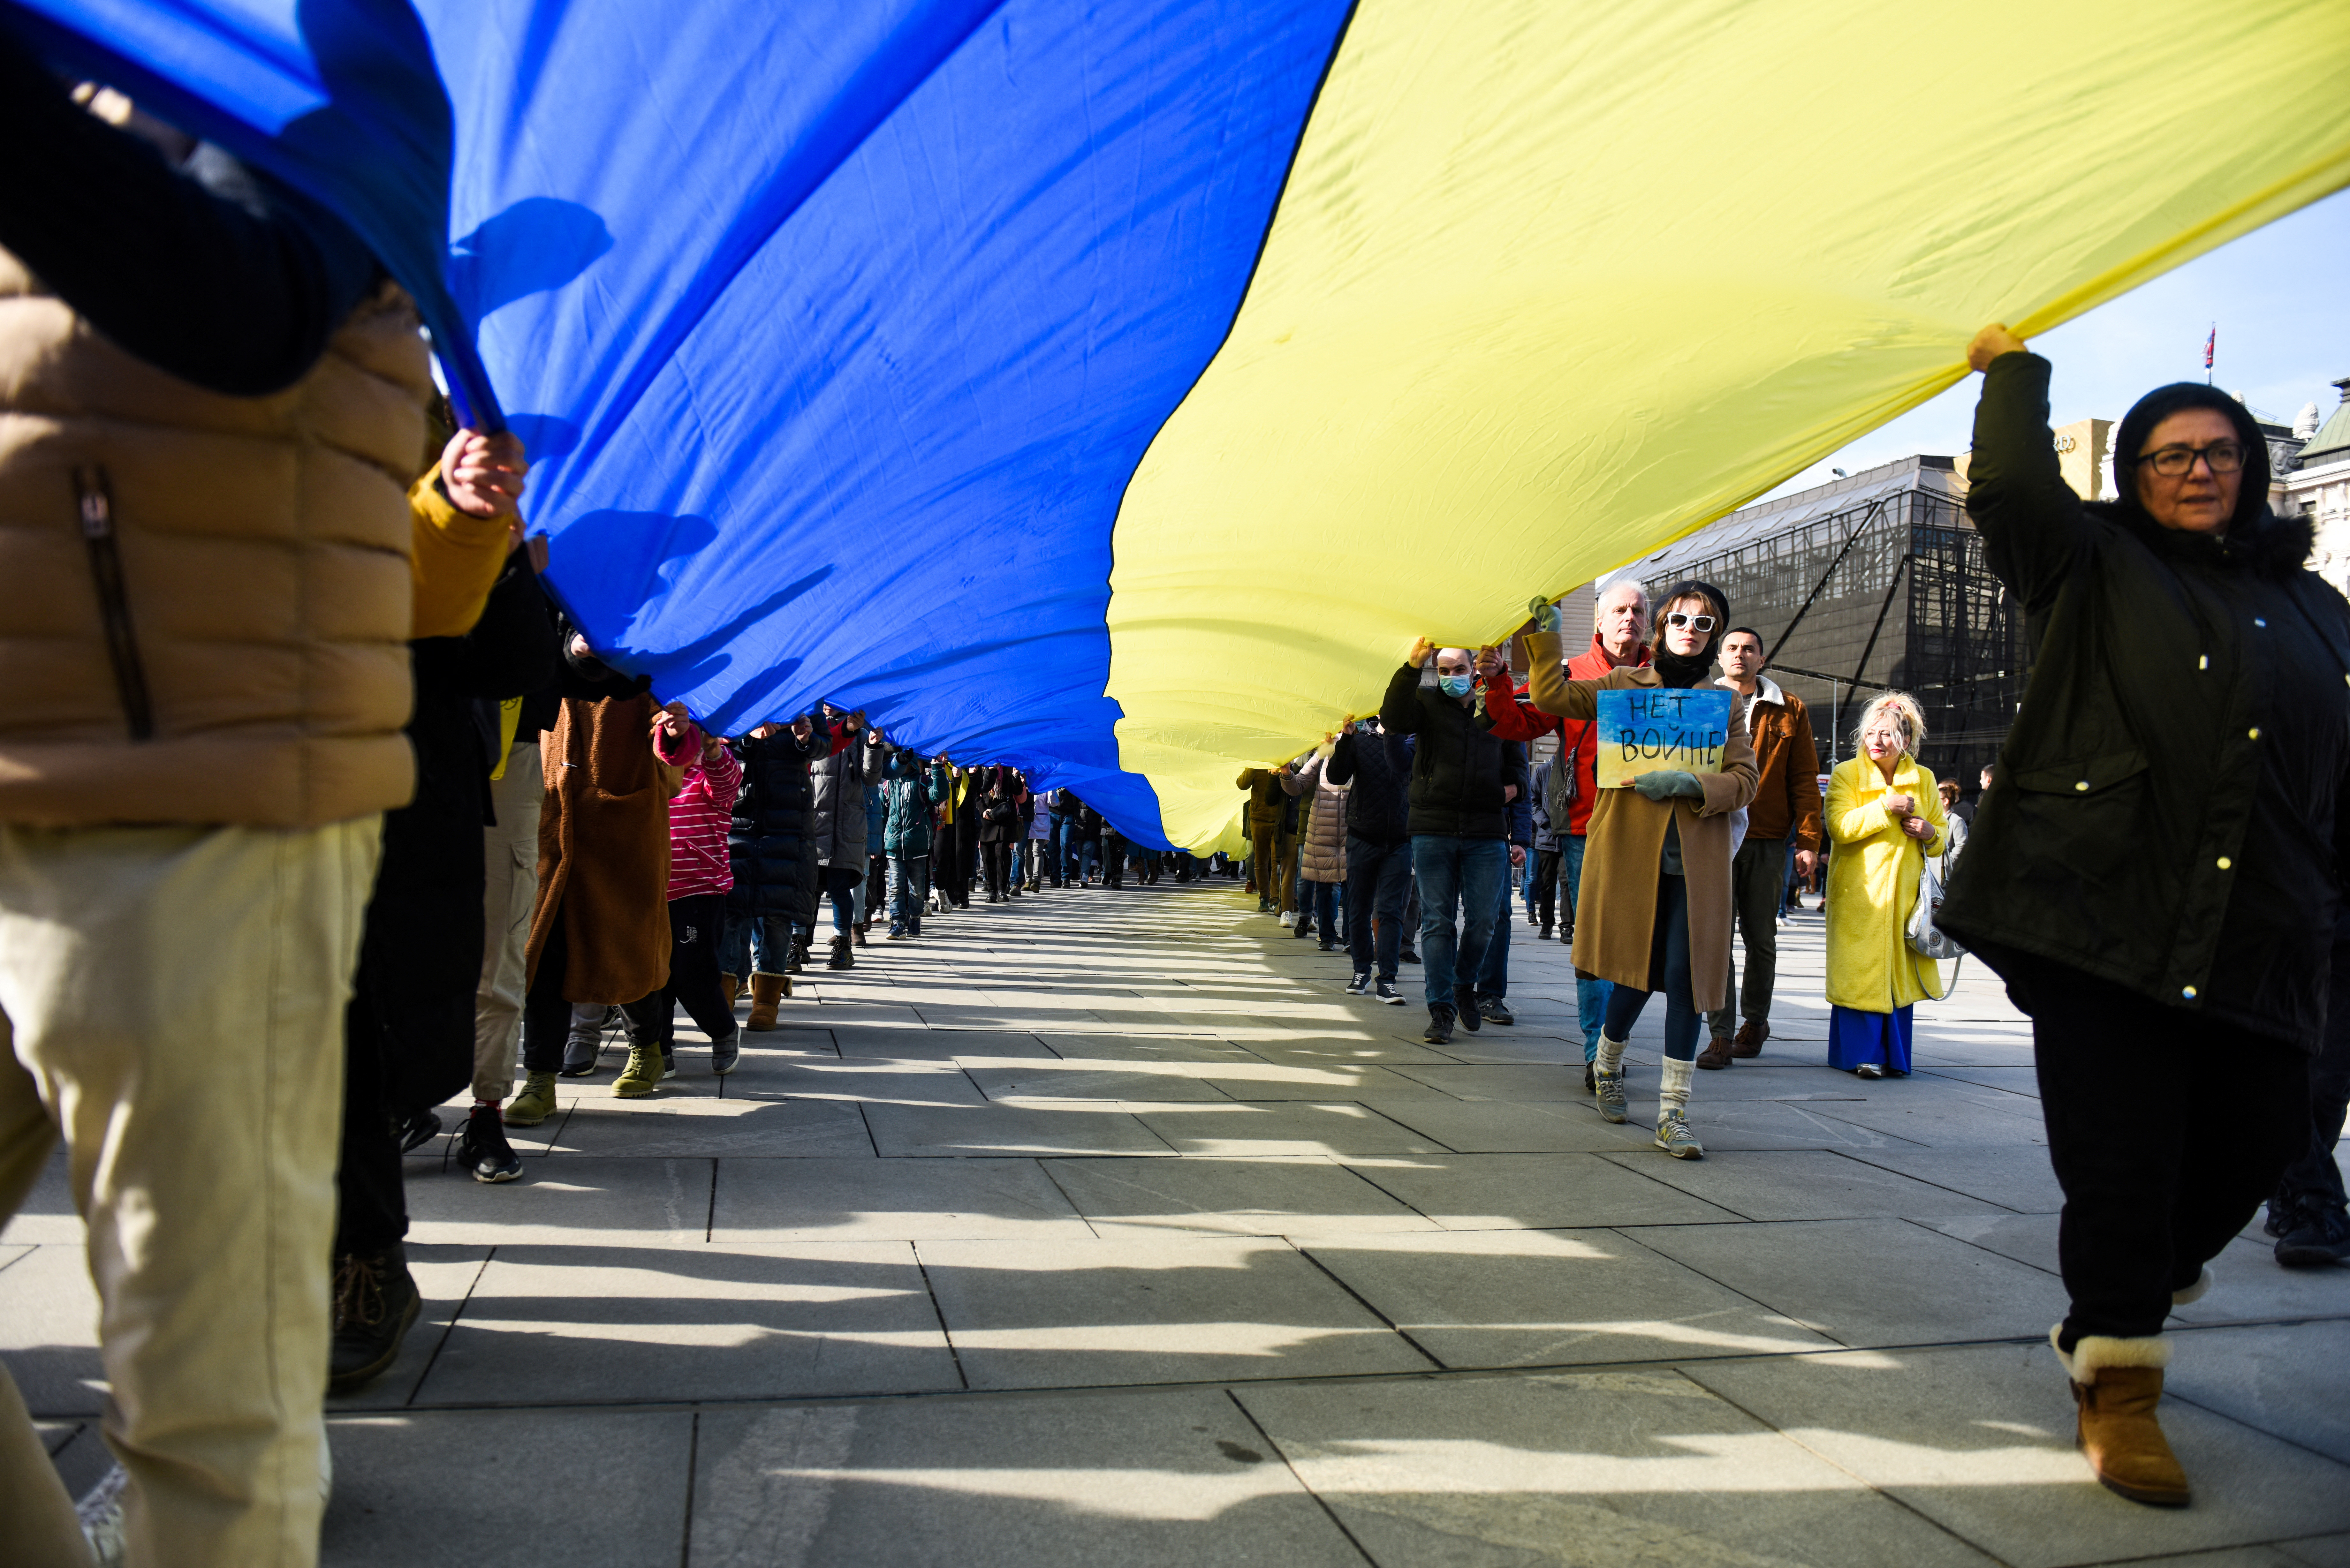 People take part in an anti-war protest, following Russia's invasion of Ukraine, in Belgrade